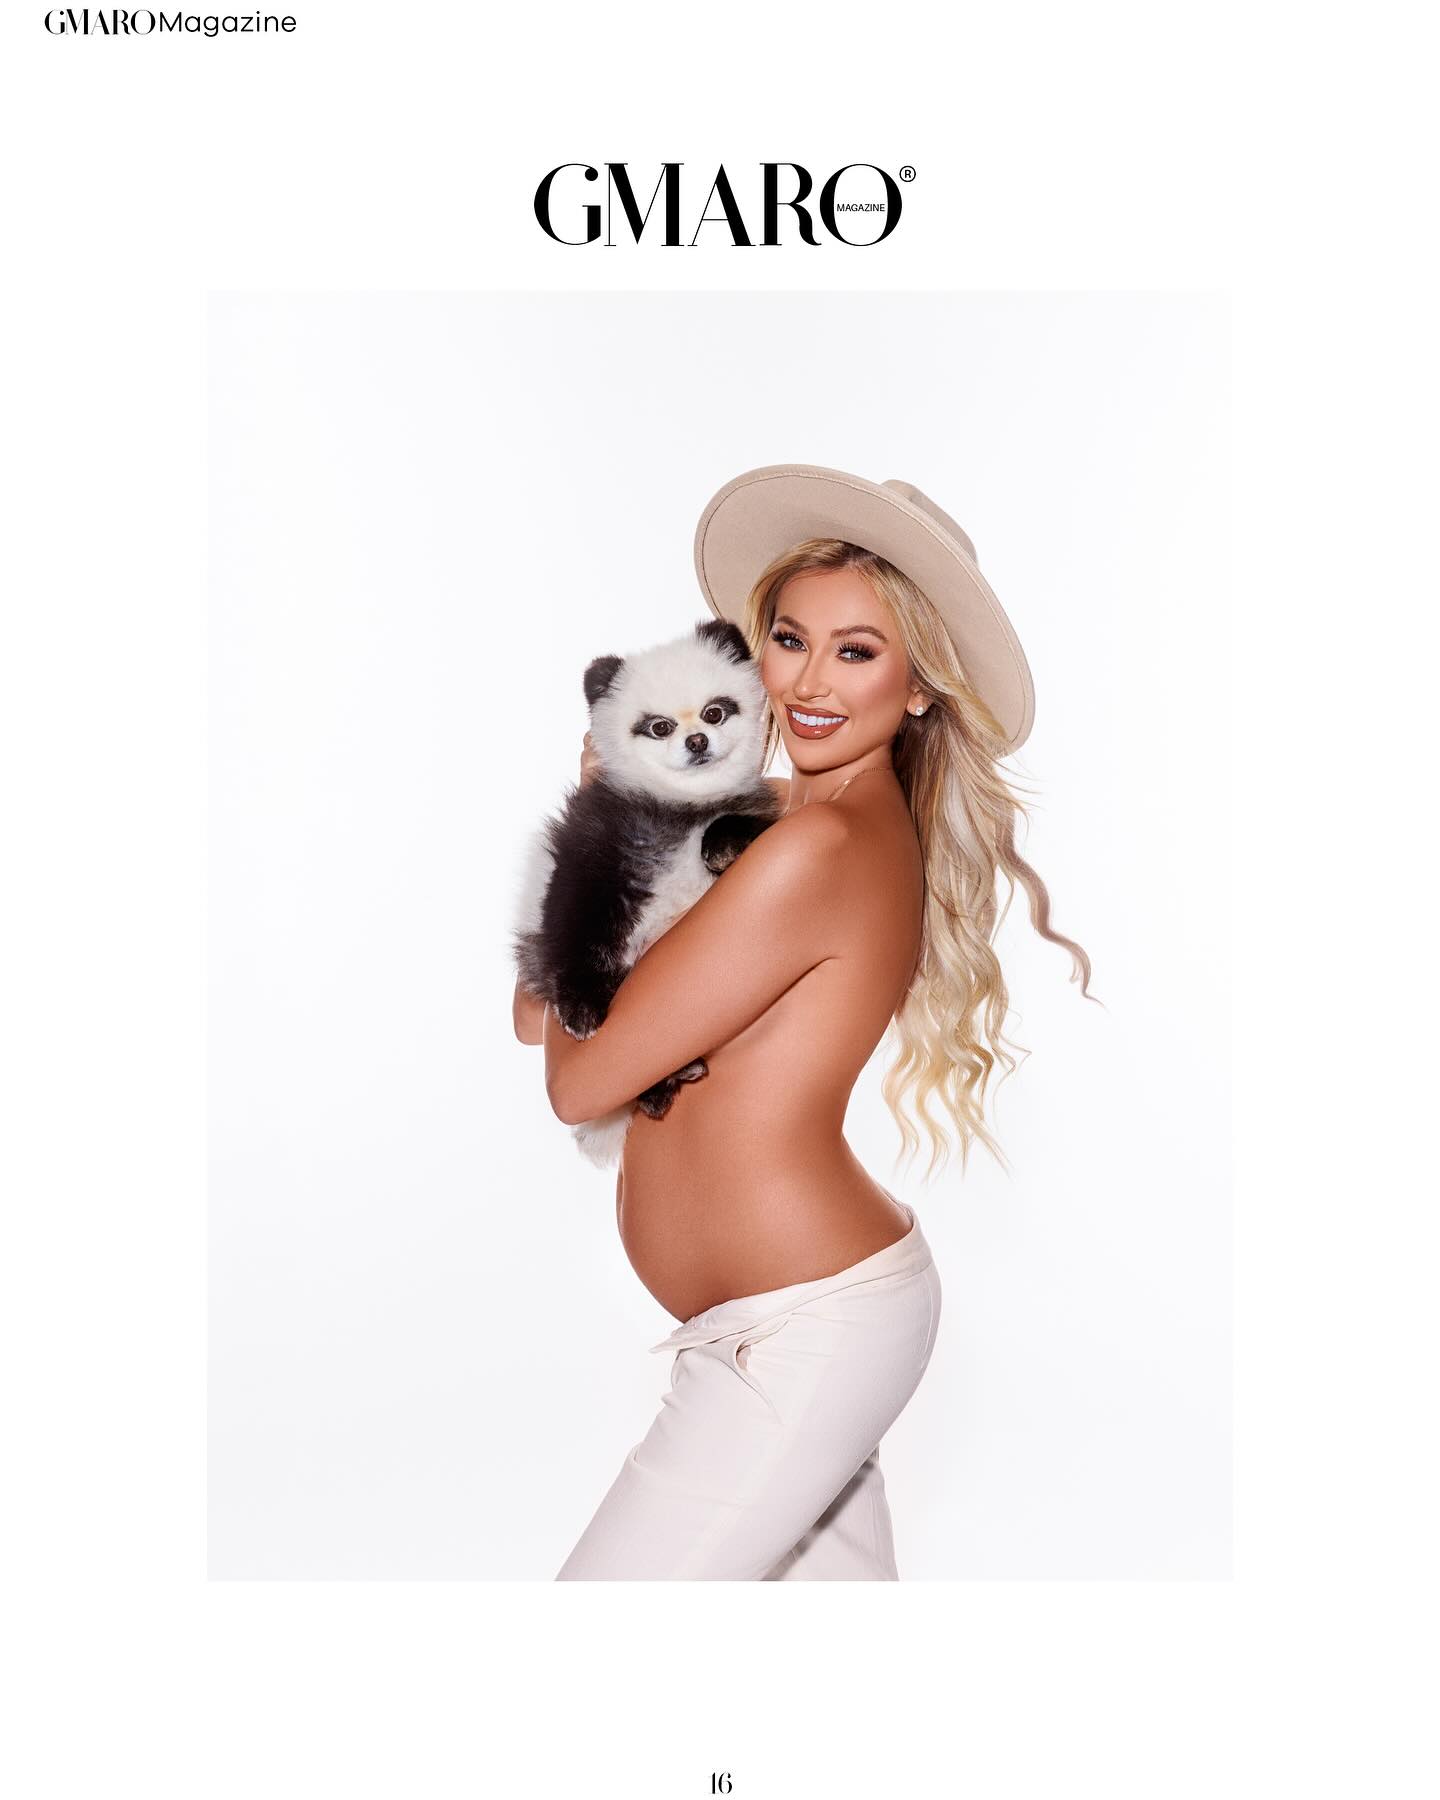 Beyonddd excited to share our new cover!!! 

Thank you @gmaromagazine 🤩

For Ocean, Yuki, I first ever cover! Shot by the amazing @oxanaalexphotography 

Glam @makeupgayane1 & @makeupbyadrianam 
Hair @peterhairbh 

Can’t even begin to explain how much this makes me miss my pregnancy, I truly LOVED being pregnant and can’t wait to do it again… 😂🤍